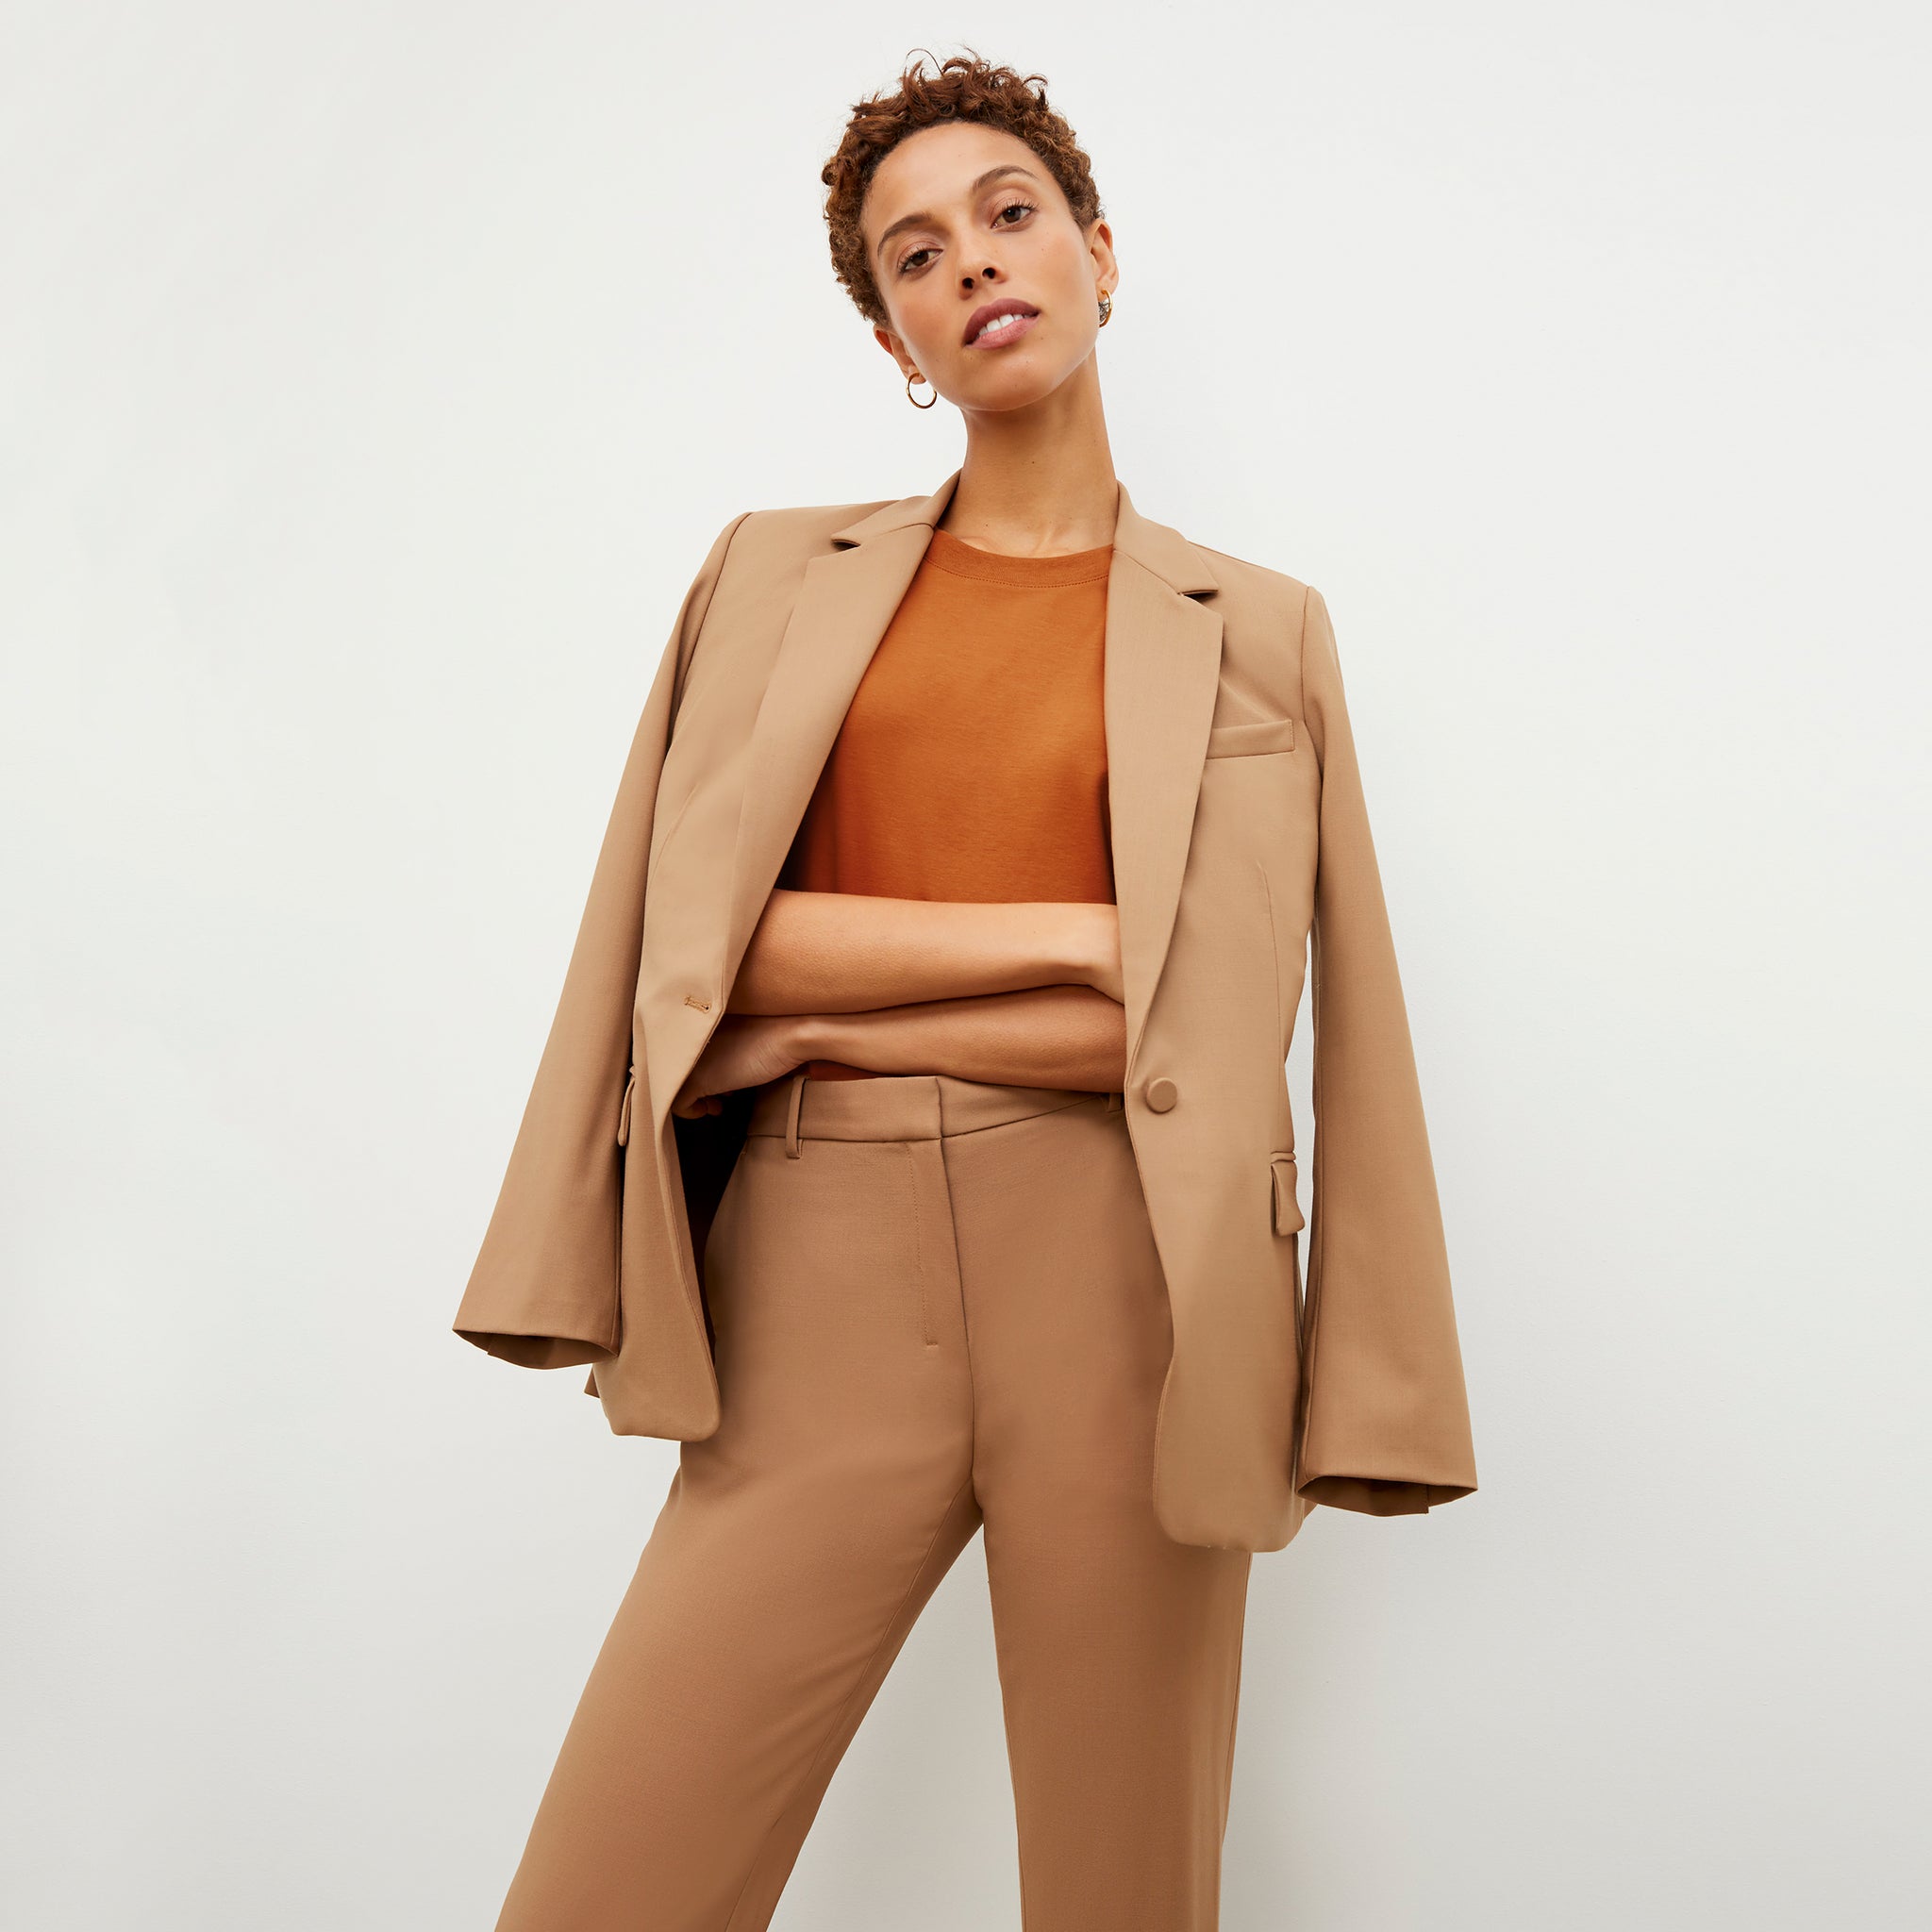 Front image of a woman standing wearing the Mejia pant in camel